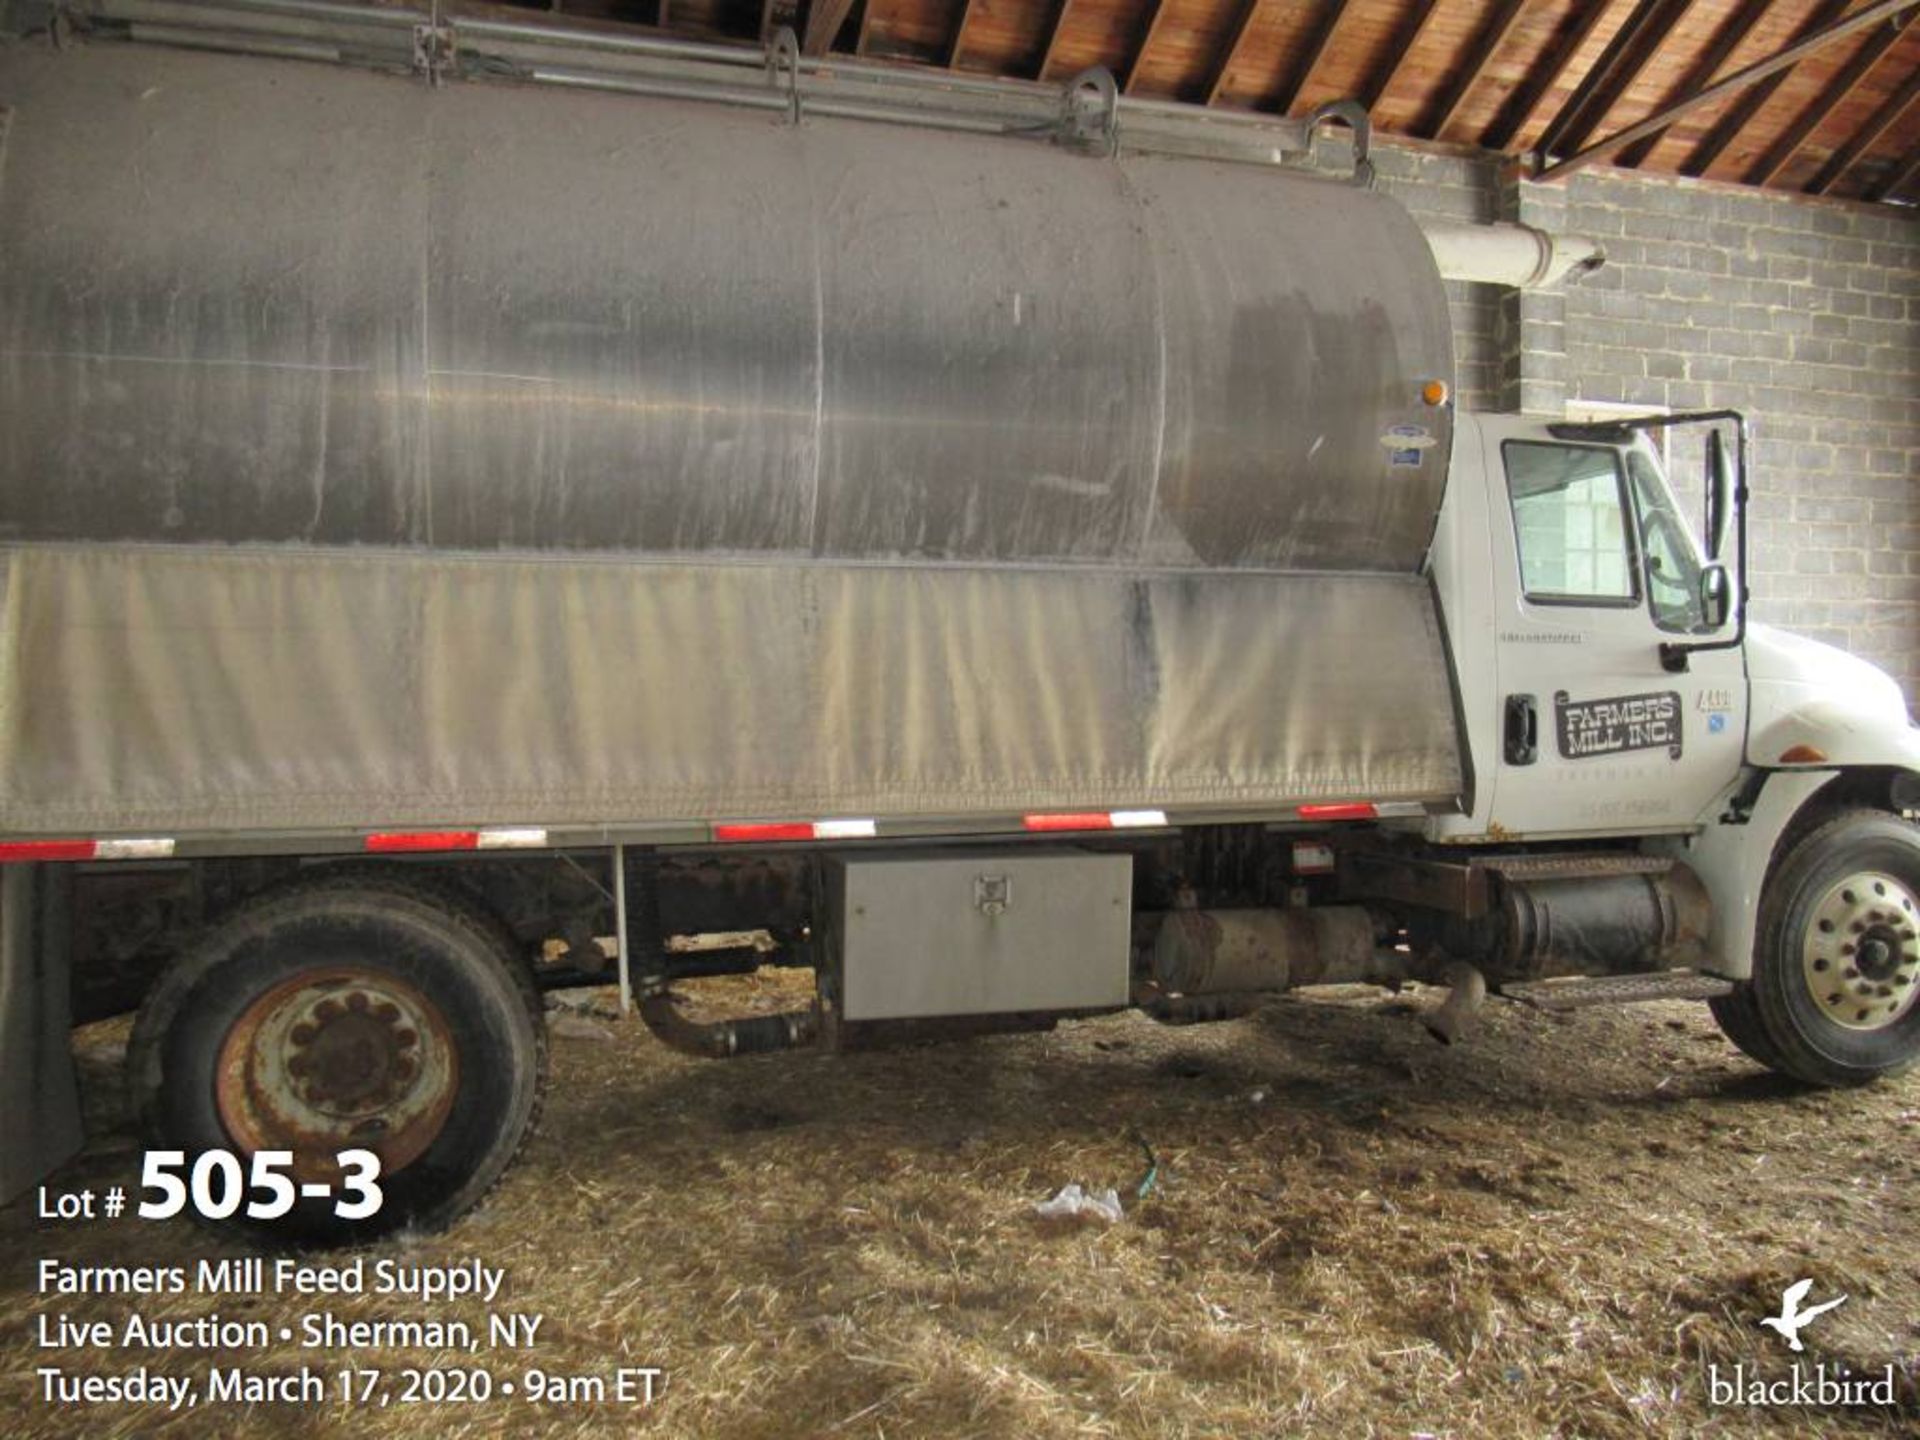 2004 International DT530 feed truck - Image 4 of 18